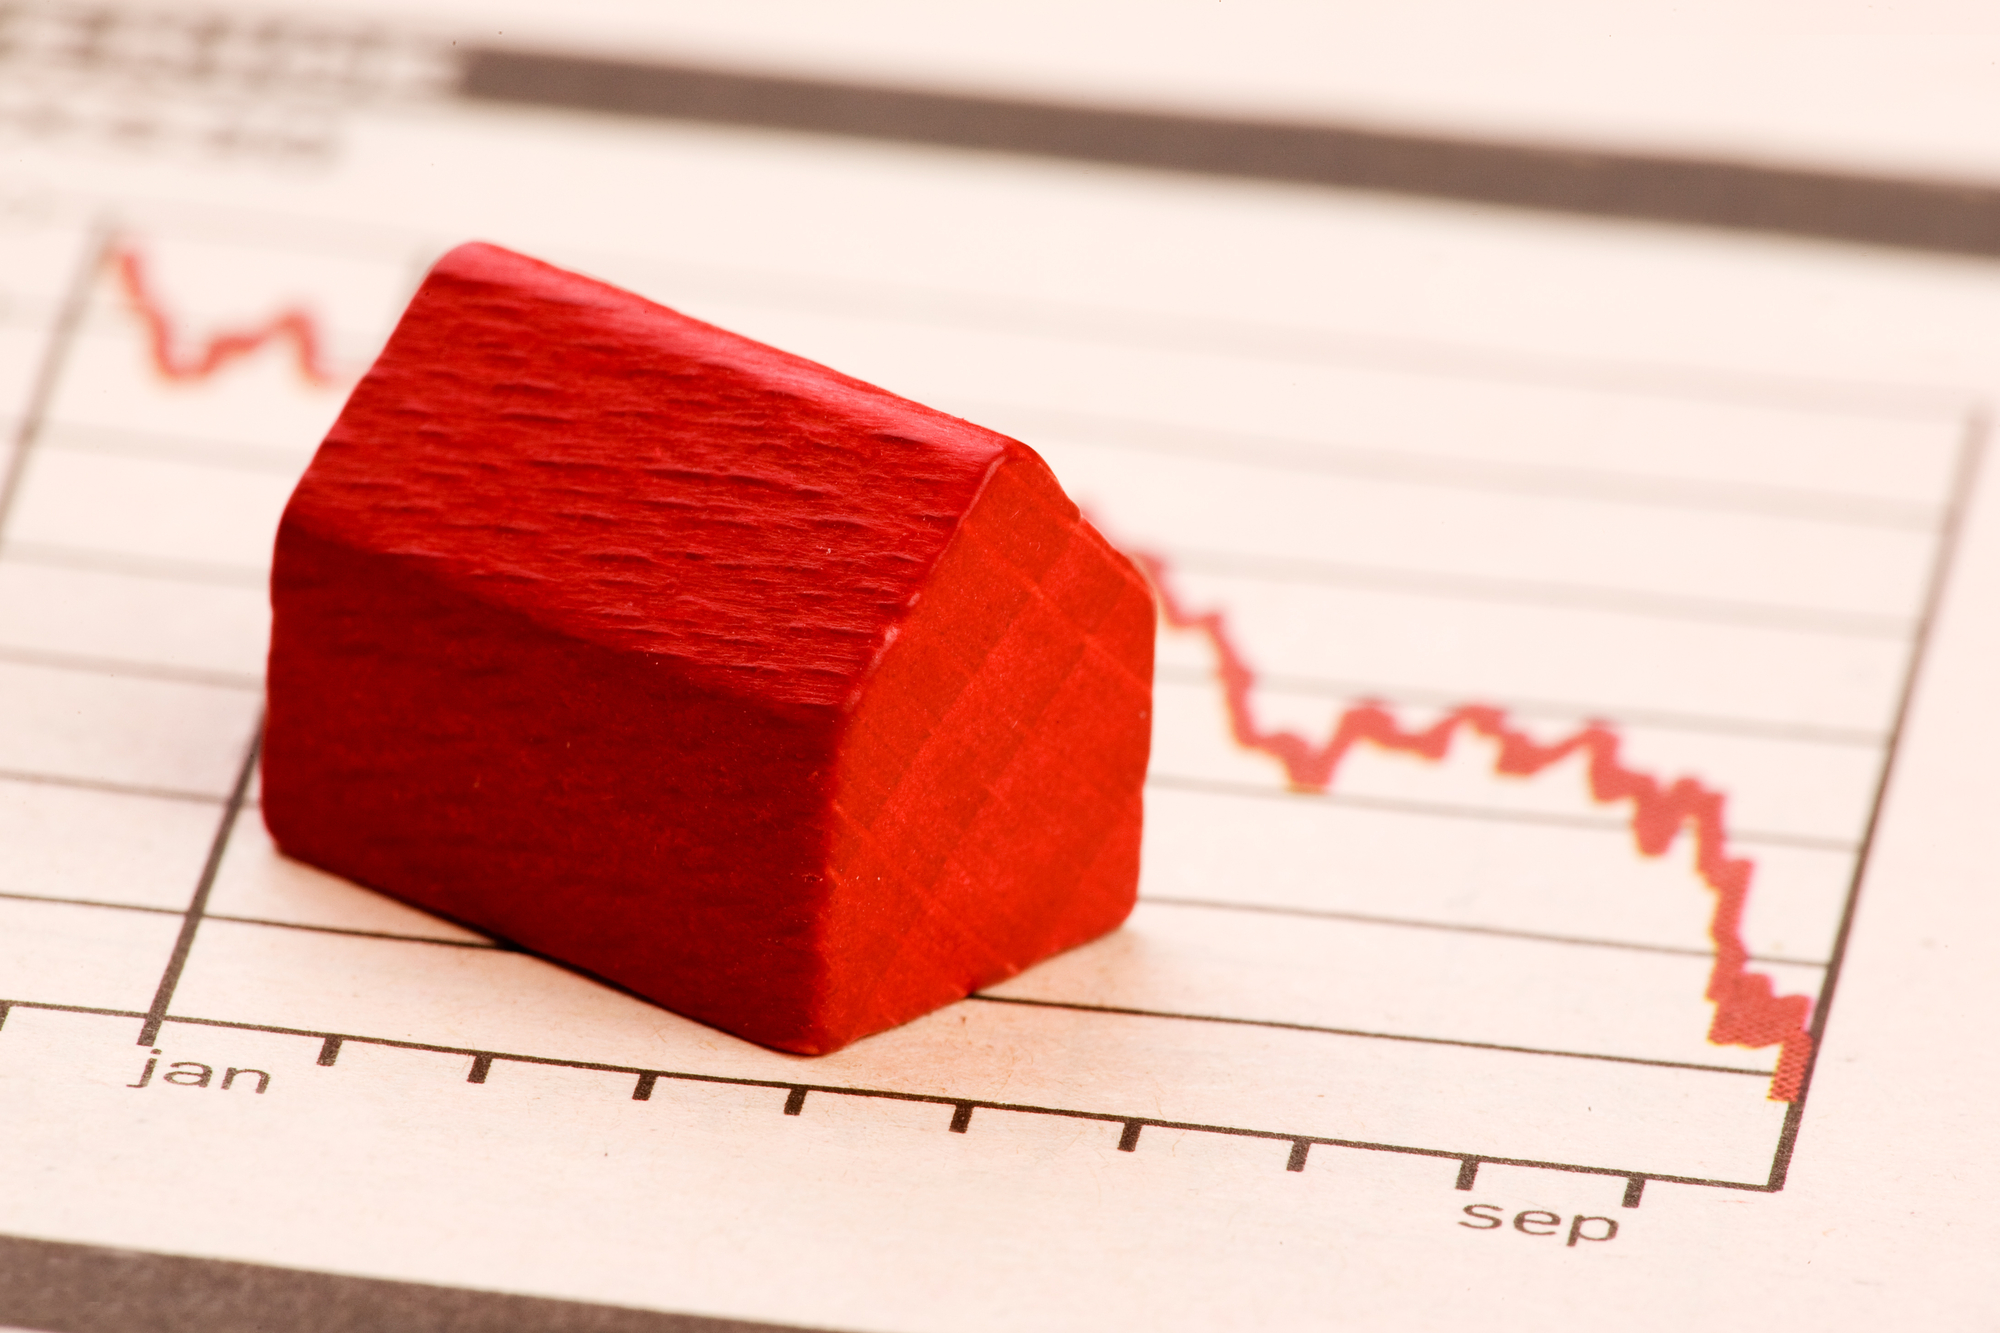 A tiny red house model sits on a graph with a red line showing a downward trend.